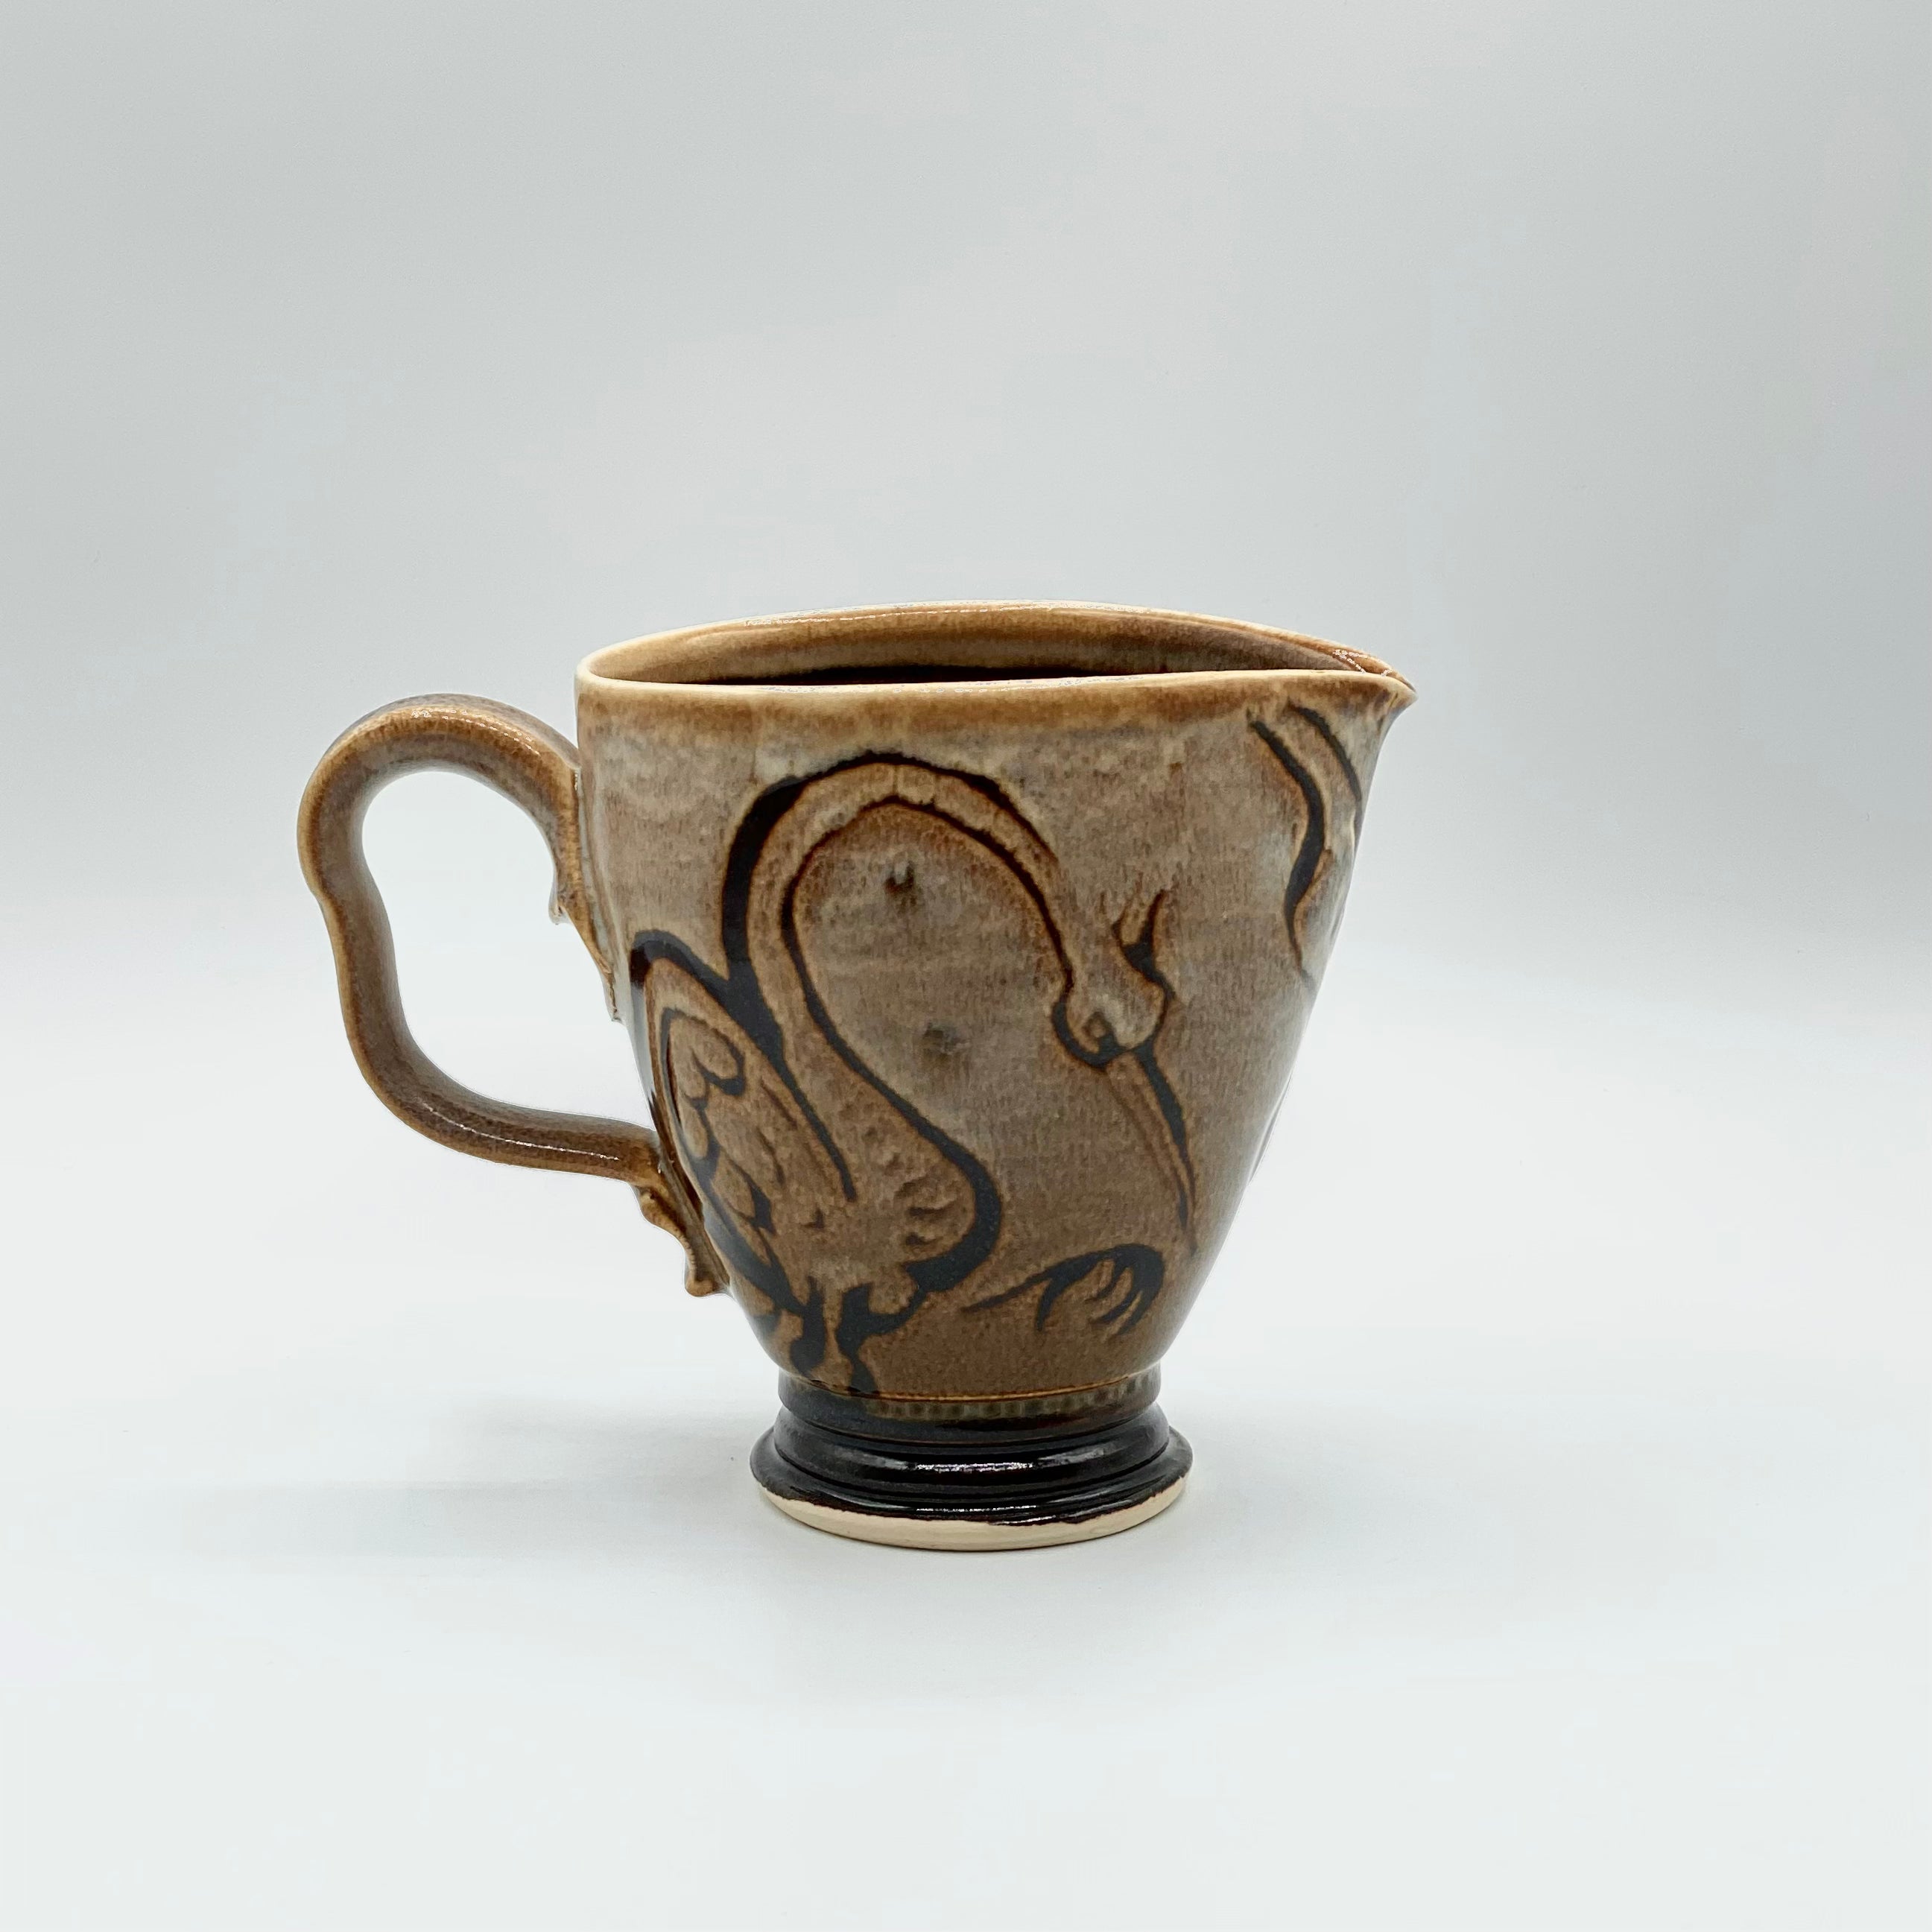 Jug by Juggler’s Cove Pottery